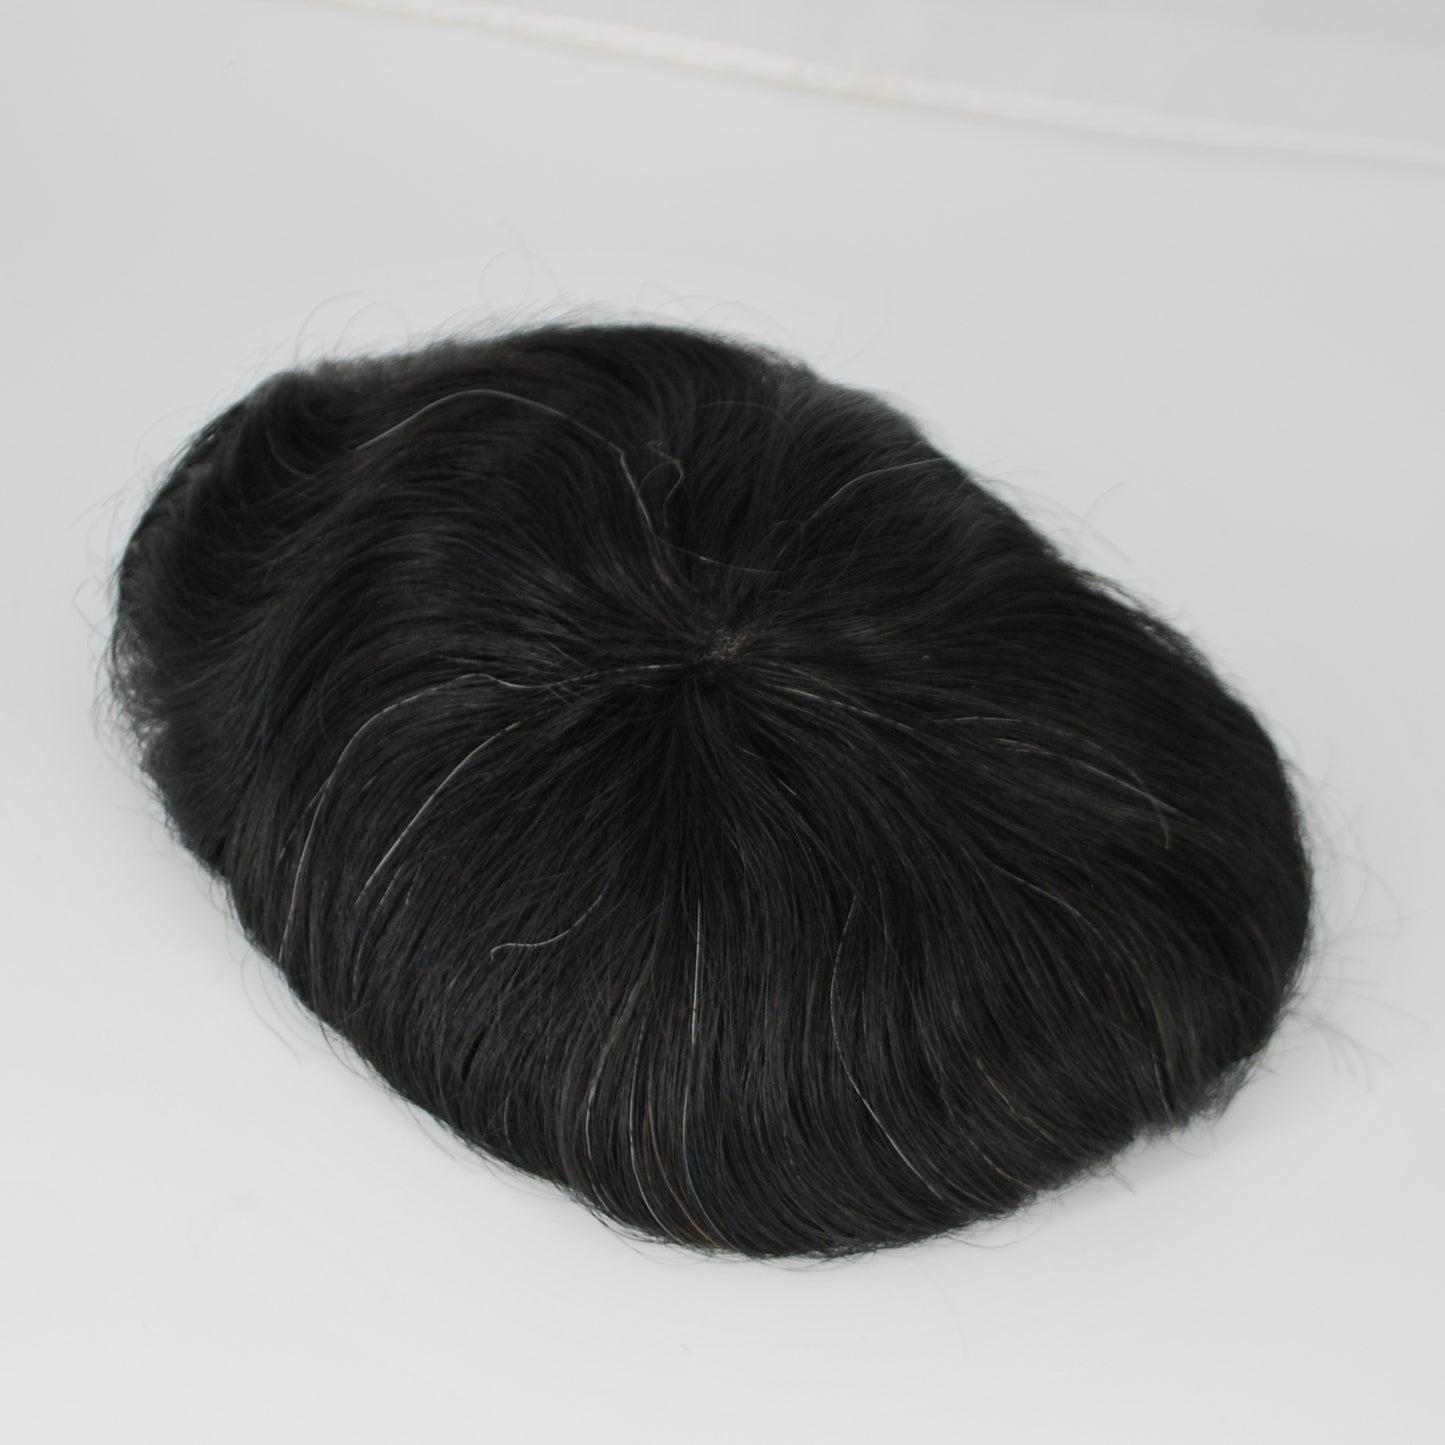 Clearance toupee #1 jet black with 5% grey mixed men hair system all french lace 130% medium density hair piece